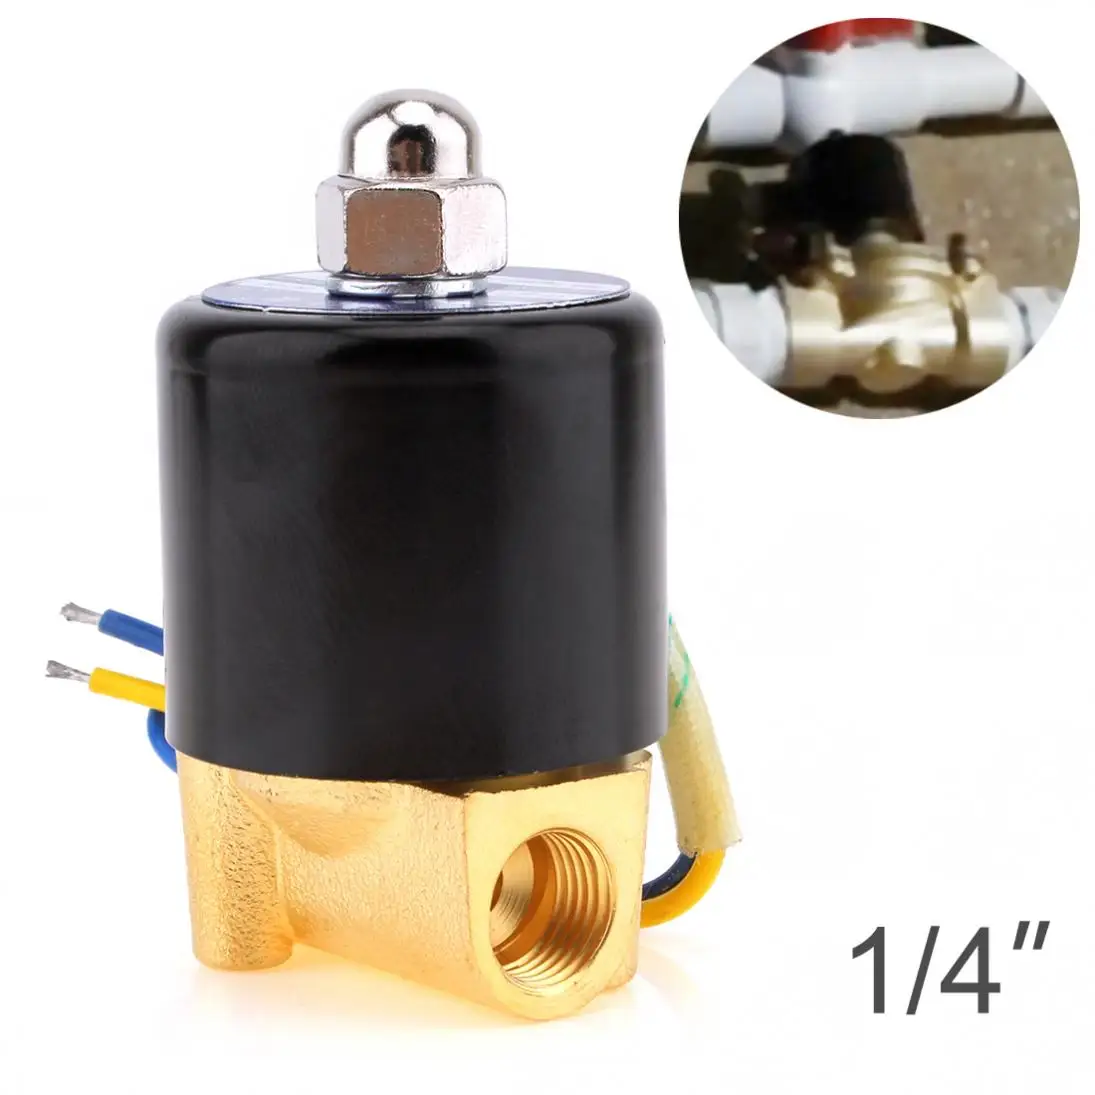 

Solenoid Valve DC 12V 1/4" NPT N/C Brass Normally Closed Electric Valve for Water Oil Air Diesel-Gas Fuels